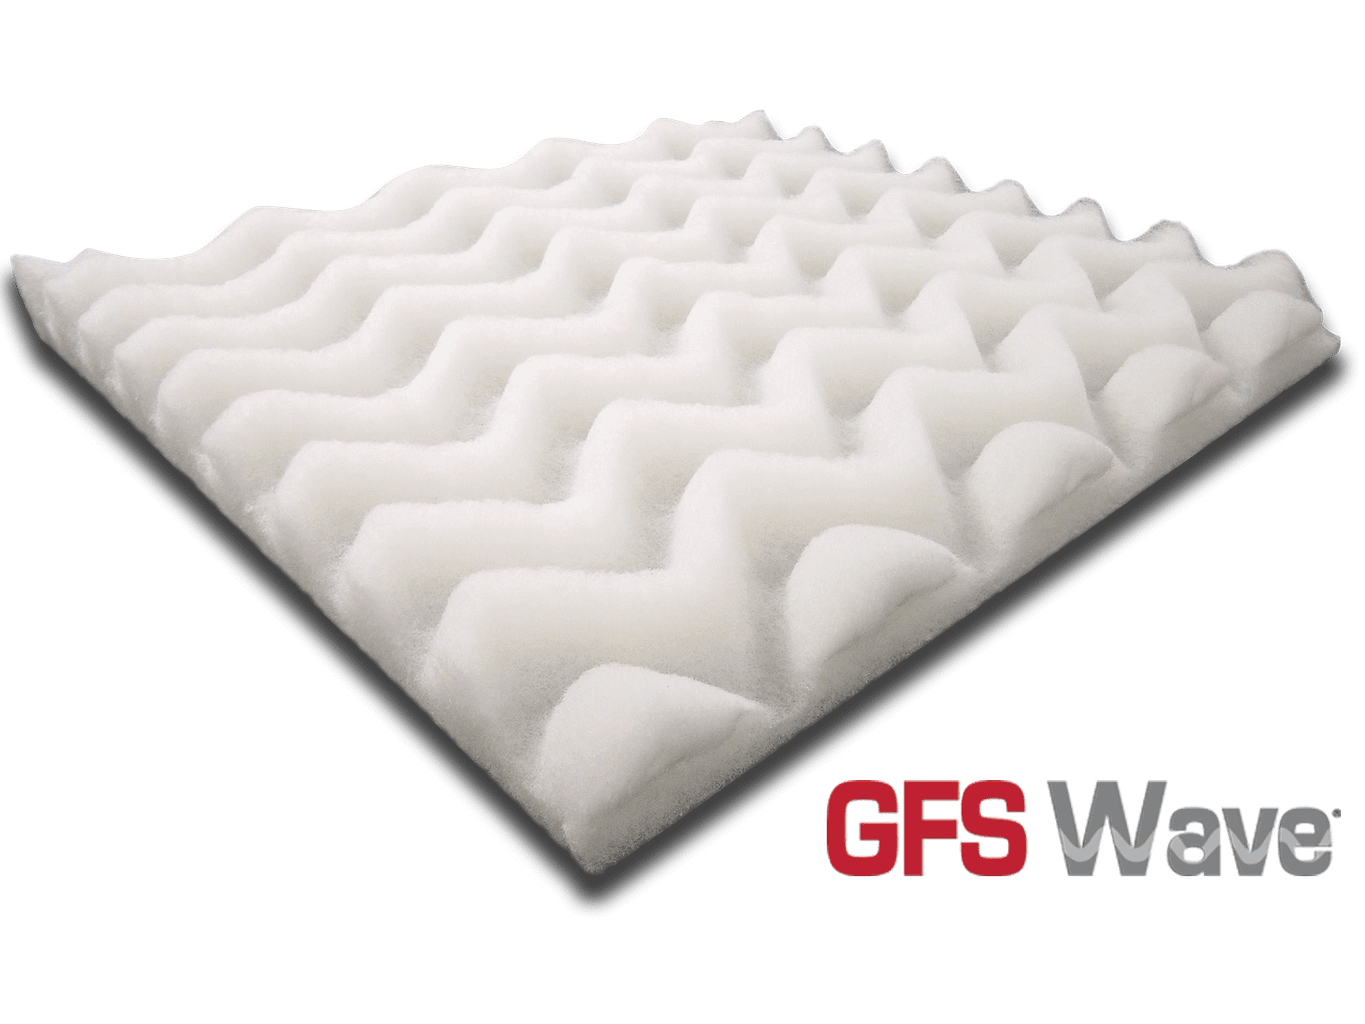 GFS paint booth Wave Filter